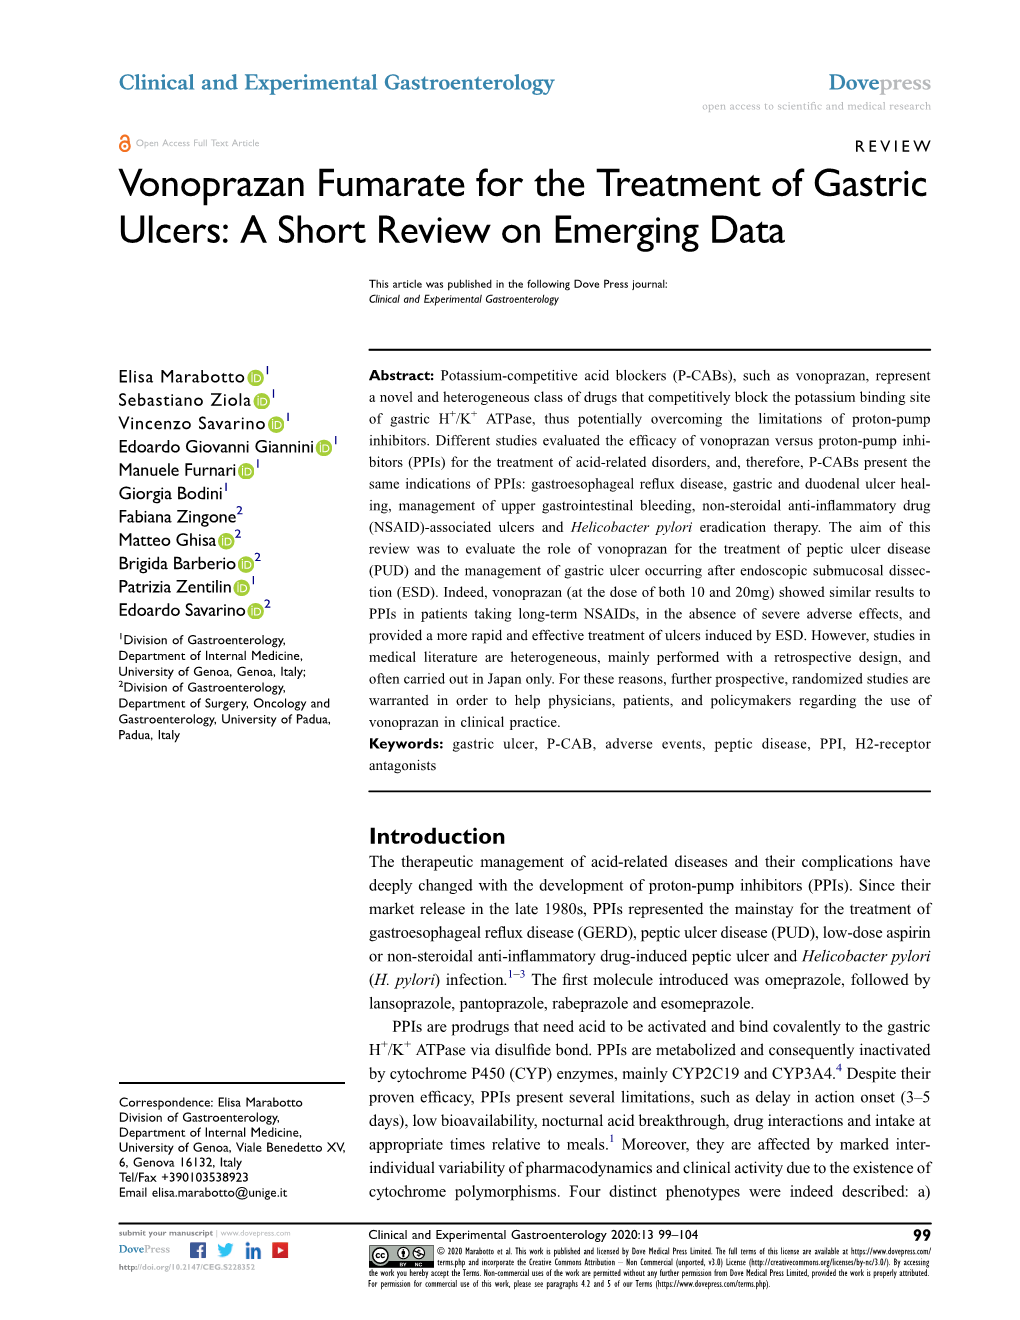 Vonoprazan Fumarate for the Treatment of Gastric Ulcers: a Short Review on Emerging Data